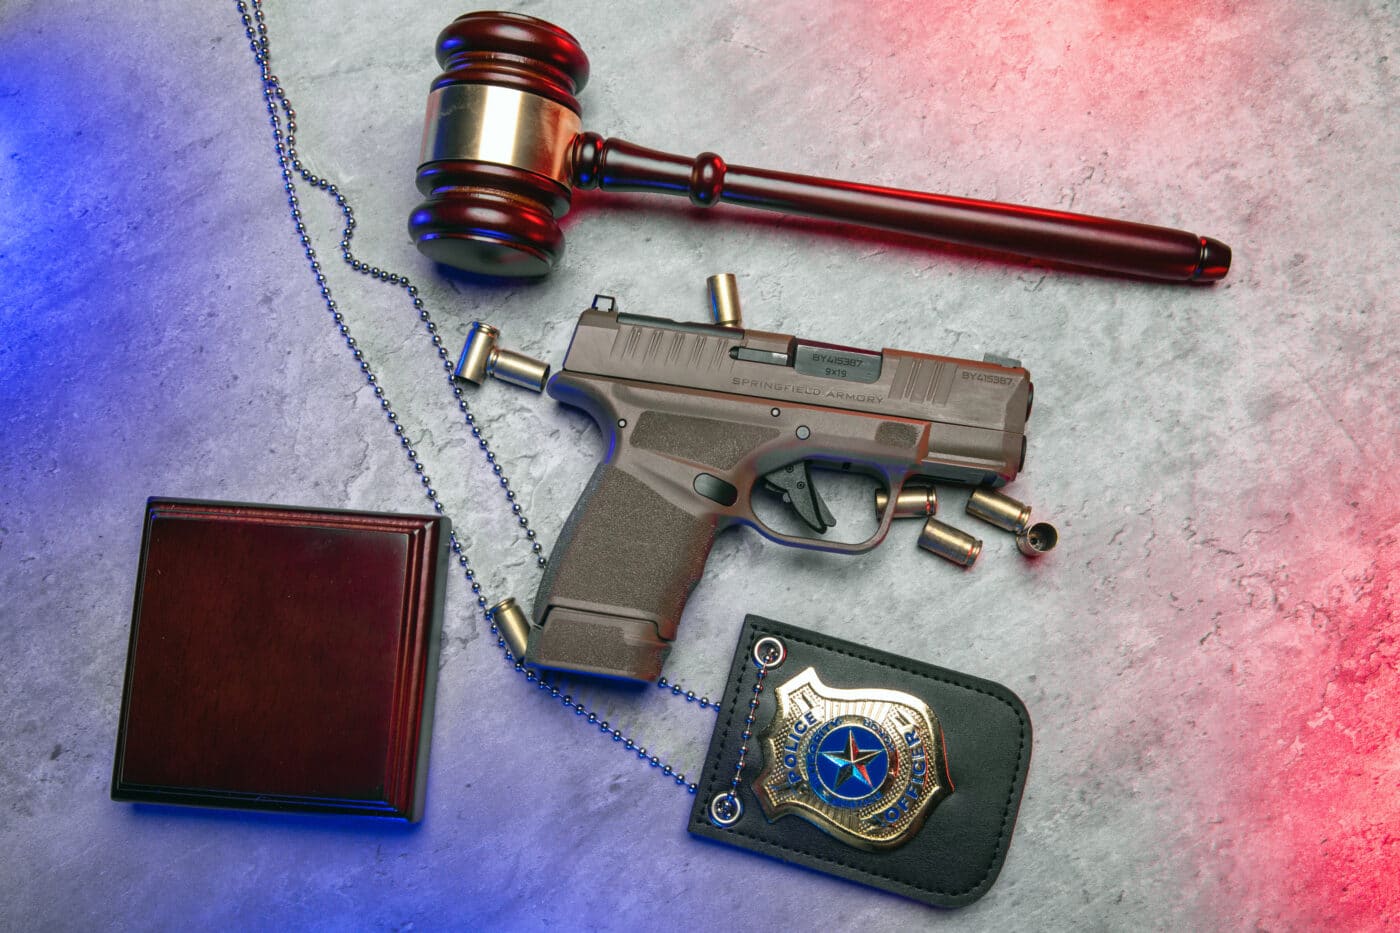 Self defense pistol next to wallet, police badge, and gavel